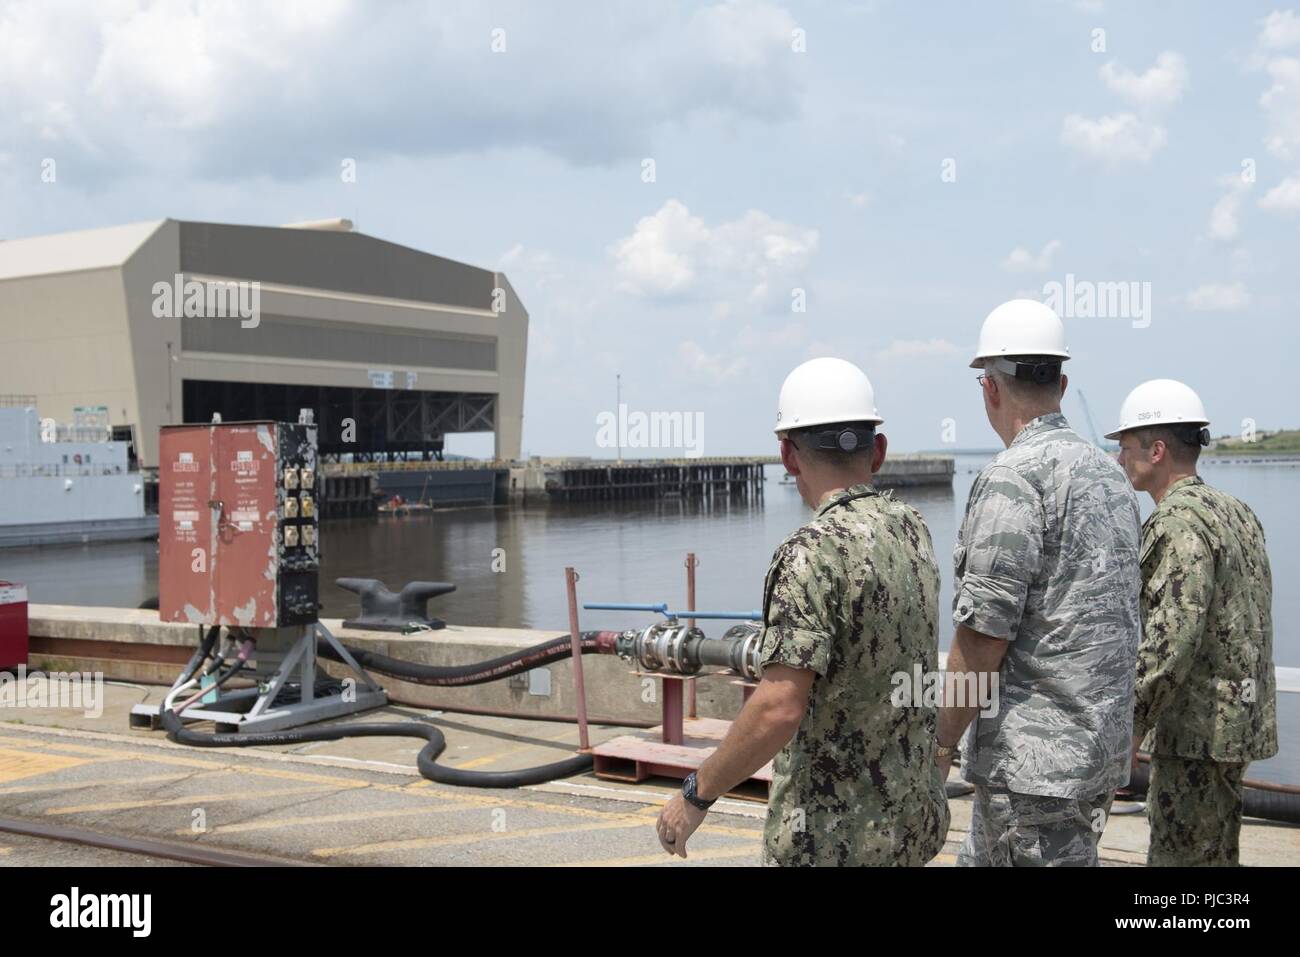 Gen. John E. Hyten, commander, U.S. Strategic Command (USSTRATCOM), views the dry dock at Naval Submarine Base Kings Bay, Ga. The base is home to six of the Ohio-class ballistic missile submarines that make up the most survivable leg of the nuclear triad and support strategic deterrence. Stock Photo